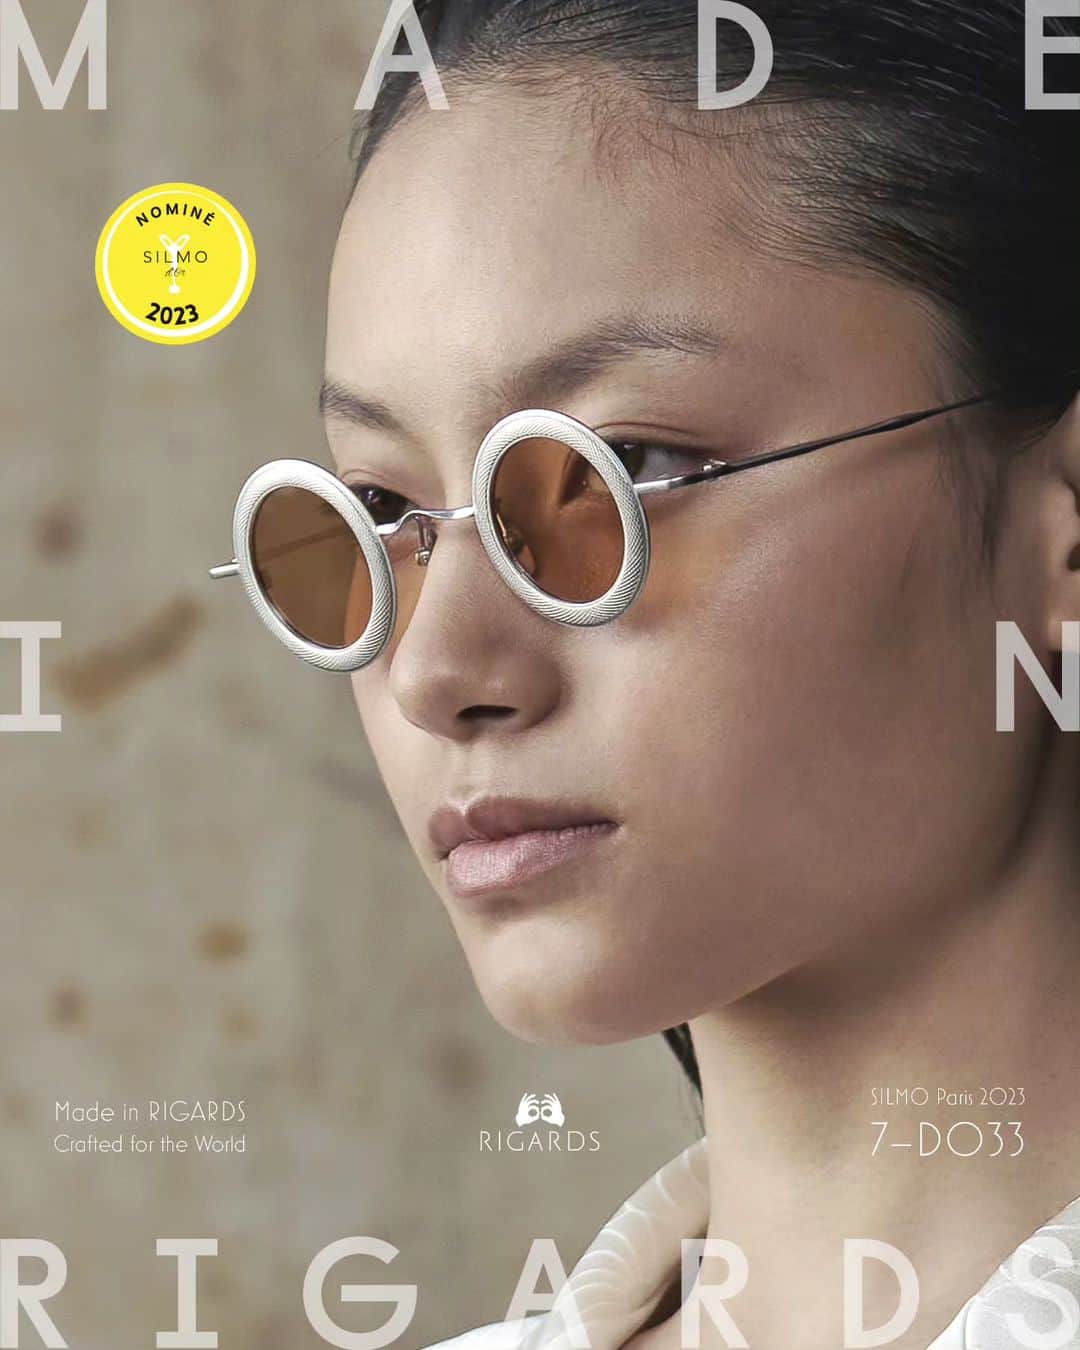 リガーズさんのインスタグラム写真 - (リガーズInstagram)「Dear Friends, we are humbled to share the news that #RIGARDS #RG1009TI has been nominated for the prestigious Silmo d’Or Award, in the ‘Optical Frame - Eyewear Designer’ category.  We are beyond grateful to @SILMOParis and the judging panel for so graciously supporting our work through this nomination. Warm congratulations also to our fellow finalists.  RIGARDS RG1009TI  The guilloché, a savoir-faire that illuminated turn-of-the-century articles of beauty from Edwardian enamel lockets to myriad objets de vertu, led the inspiration for RG1009TI.  Crafted from pure titanium, the frame’s curved rounded rims feature a subtle scale pattern that taps into a fascination with serpents and dragons.  Connecting parts and even screws made of beta-titanium further minimizes weight while maximizing flexibility.  A quintessence of RIGARDS artistry and finesse, offering a paean to old-world goldsmithery and a compelling reappraisal of eyewear as functional jewelry for the face.  We look forward to welcoming you to our presentation at #SILMOParis. We will be at Hall 7 # D033 and we look forward to welcoming you via pre-arranged appointments: info@rigards.com / DM IG @rigards. Thank you.  https://t.ly/0vUfk  #MadeInRIGARDS #CraftedForTheWorld #SILMO j'y vais!  #SILMOdOr #SILMO2023 #NatureFirst #NoToCopycats #MadScientist #TimeMachine #Patina #HandmadeForYourFace #NatureDerived #NaturalMaterials #RIGARDSPatina #PATINAbyRIGARDS #Copper #SterlingSilver #AluminumMagnesium #Titanium #Horn #Stone #Wood #Steel #LacquerArt #SunglassClip #SunglassesChain #NaturalEyewear   Apparel: @avivajxue」9月19日 11時13分 - rigards